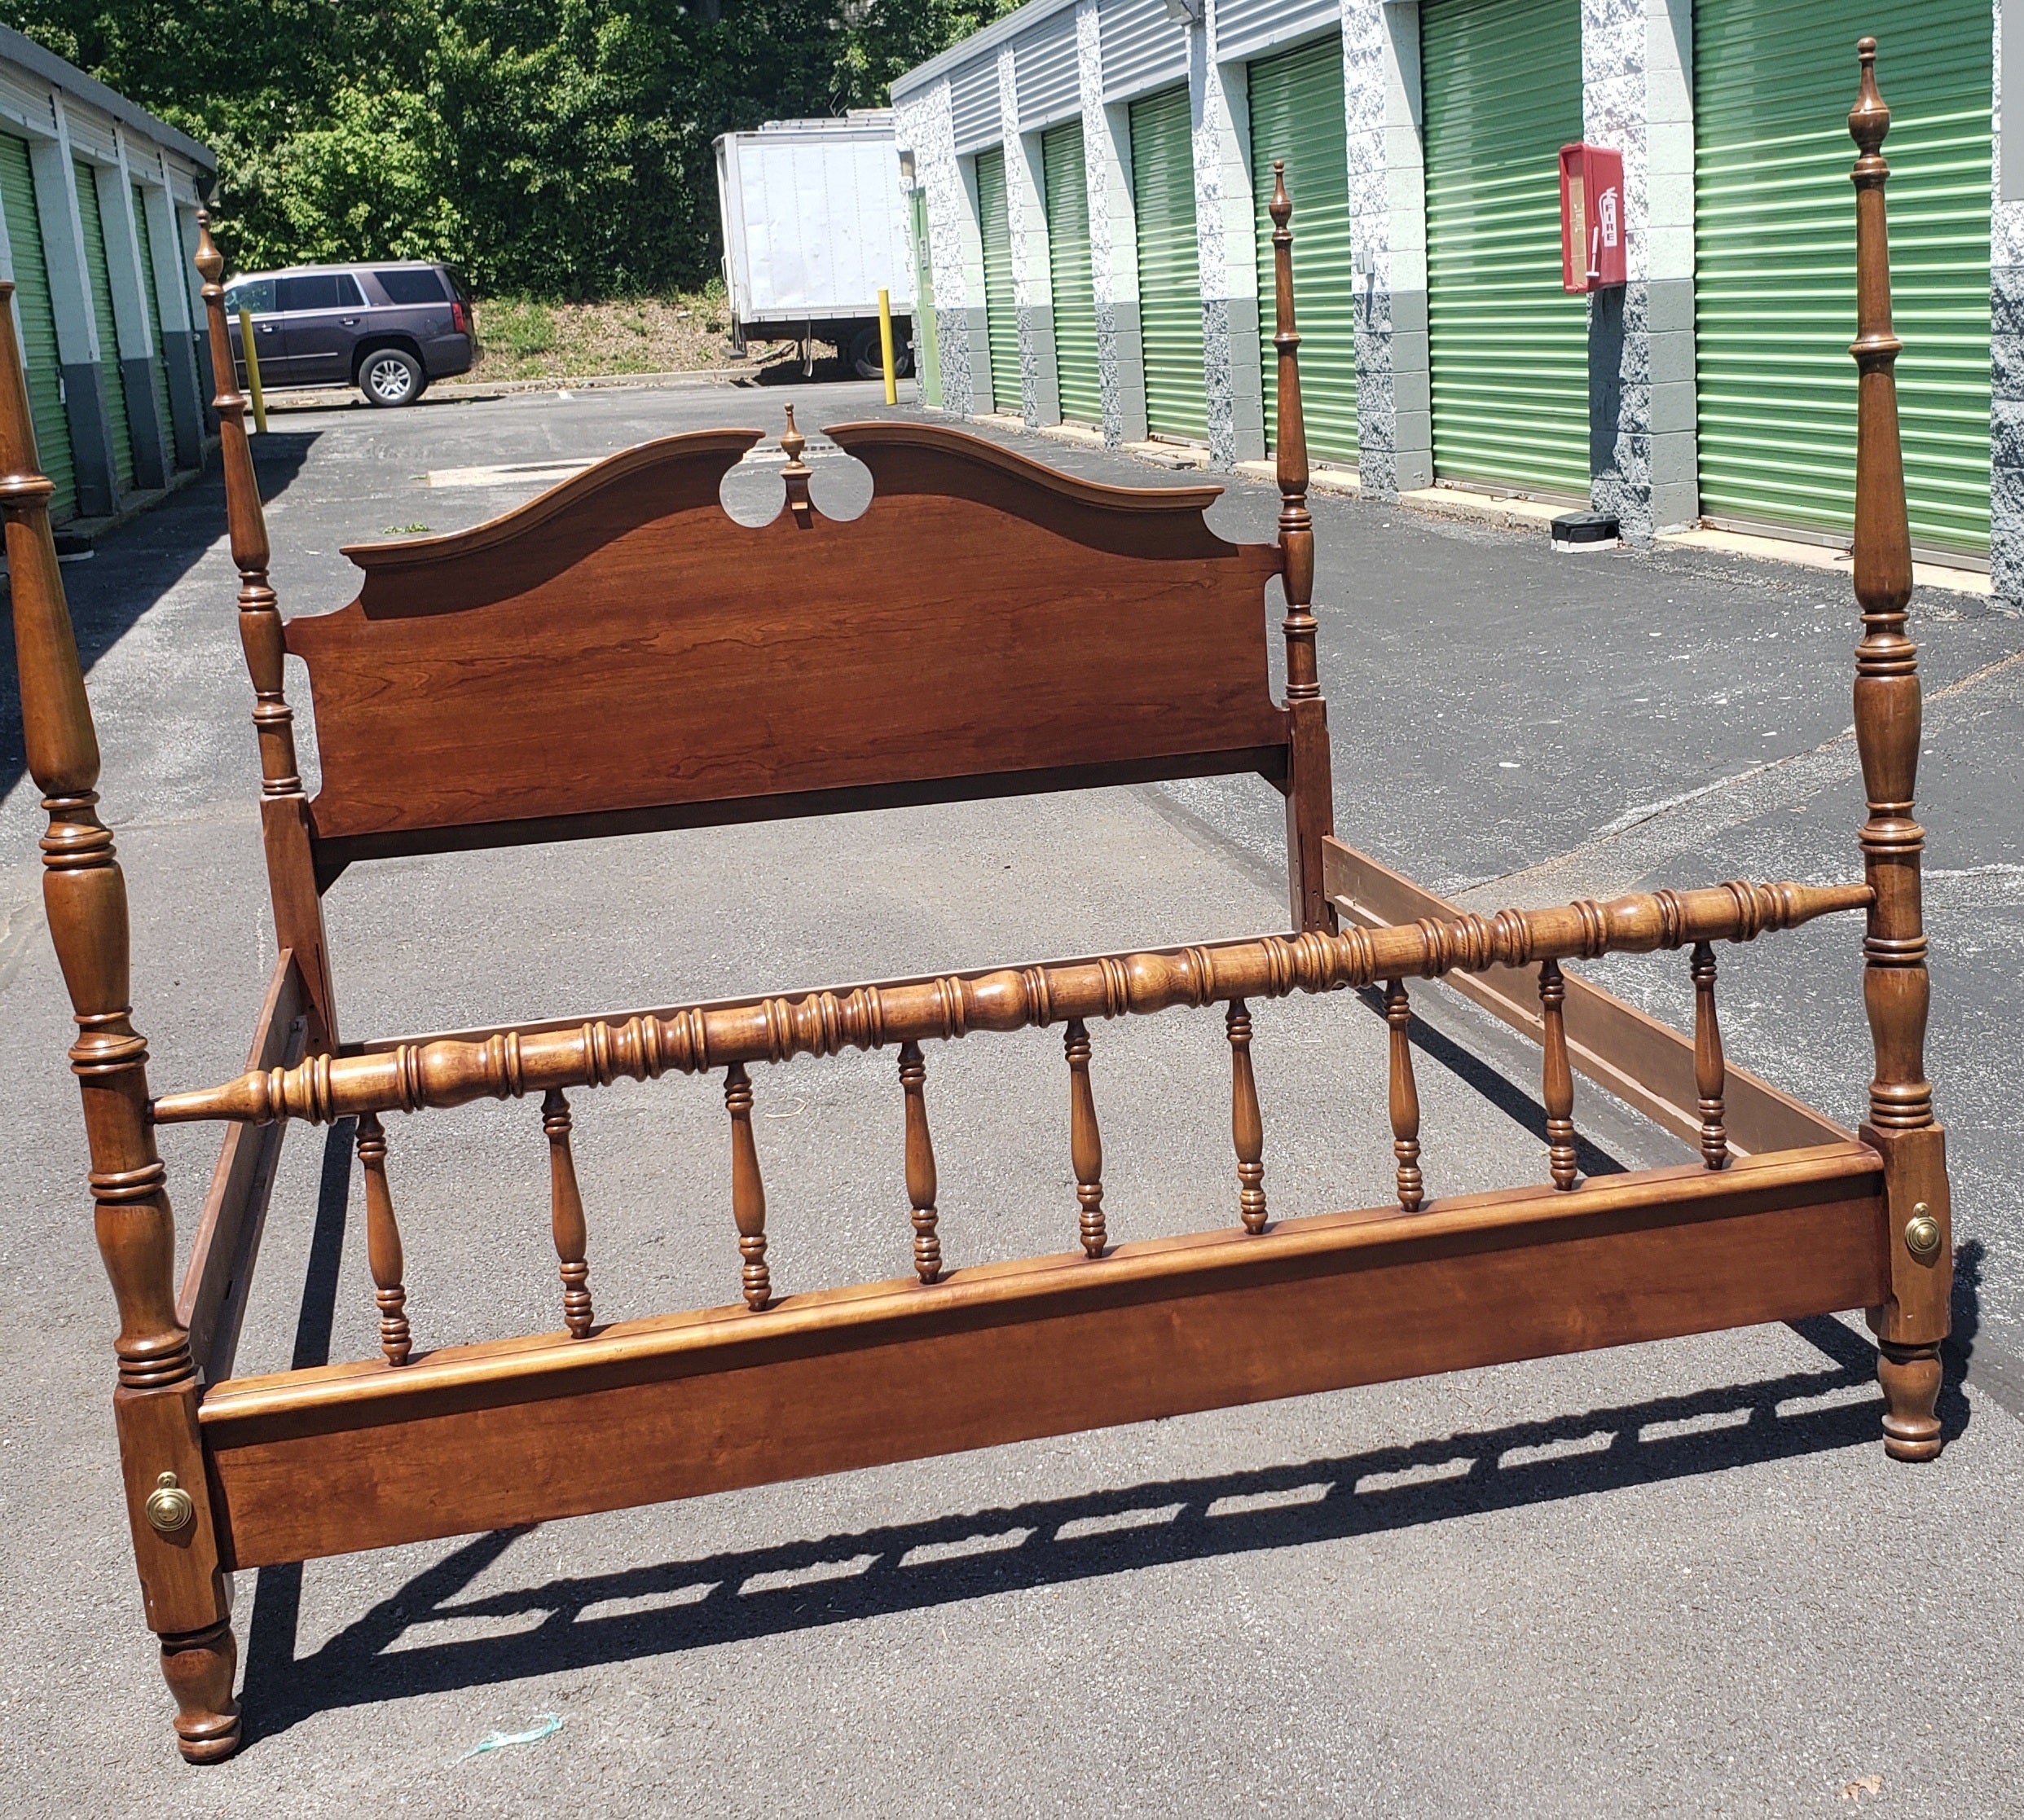 King size low poster bed in solid cherry from the American Craftmen Collection by Stanley Furniture. 
Removable finials. Very good vintage condition.
Measures 79.5